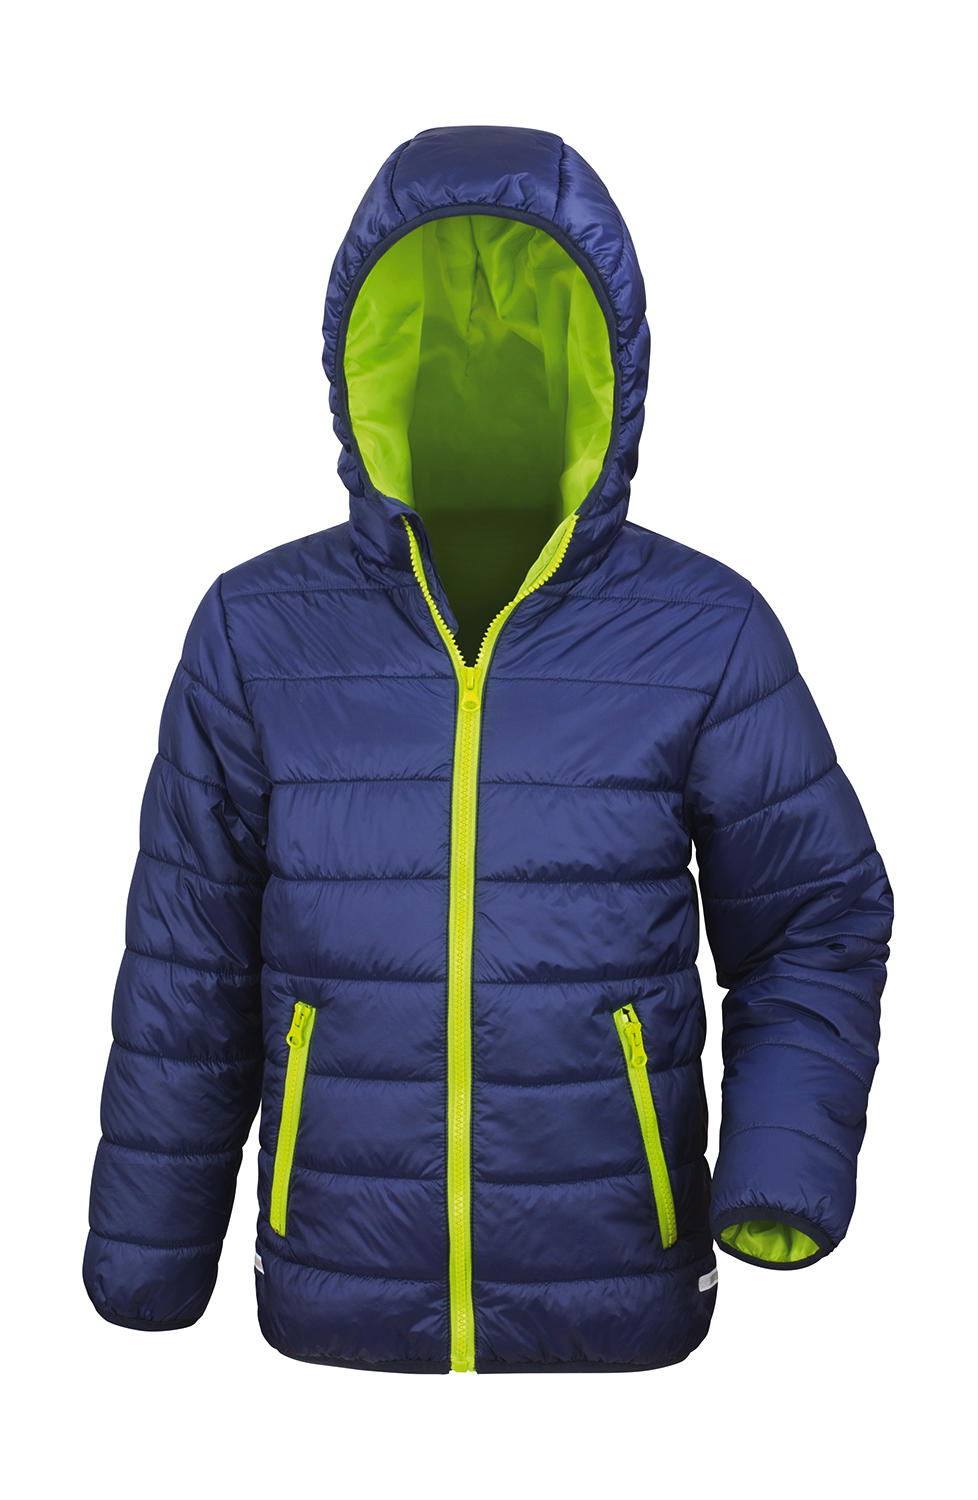  Junior/Youth Soft Padded Jacket in Farbe Navy/Lime